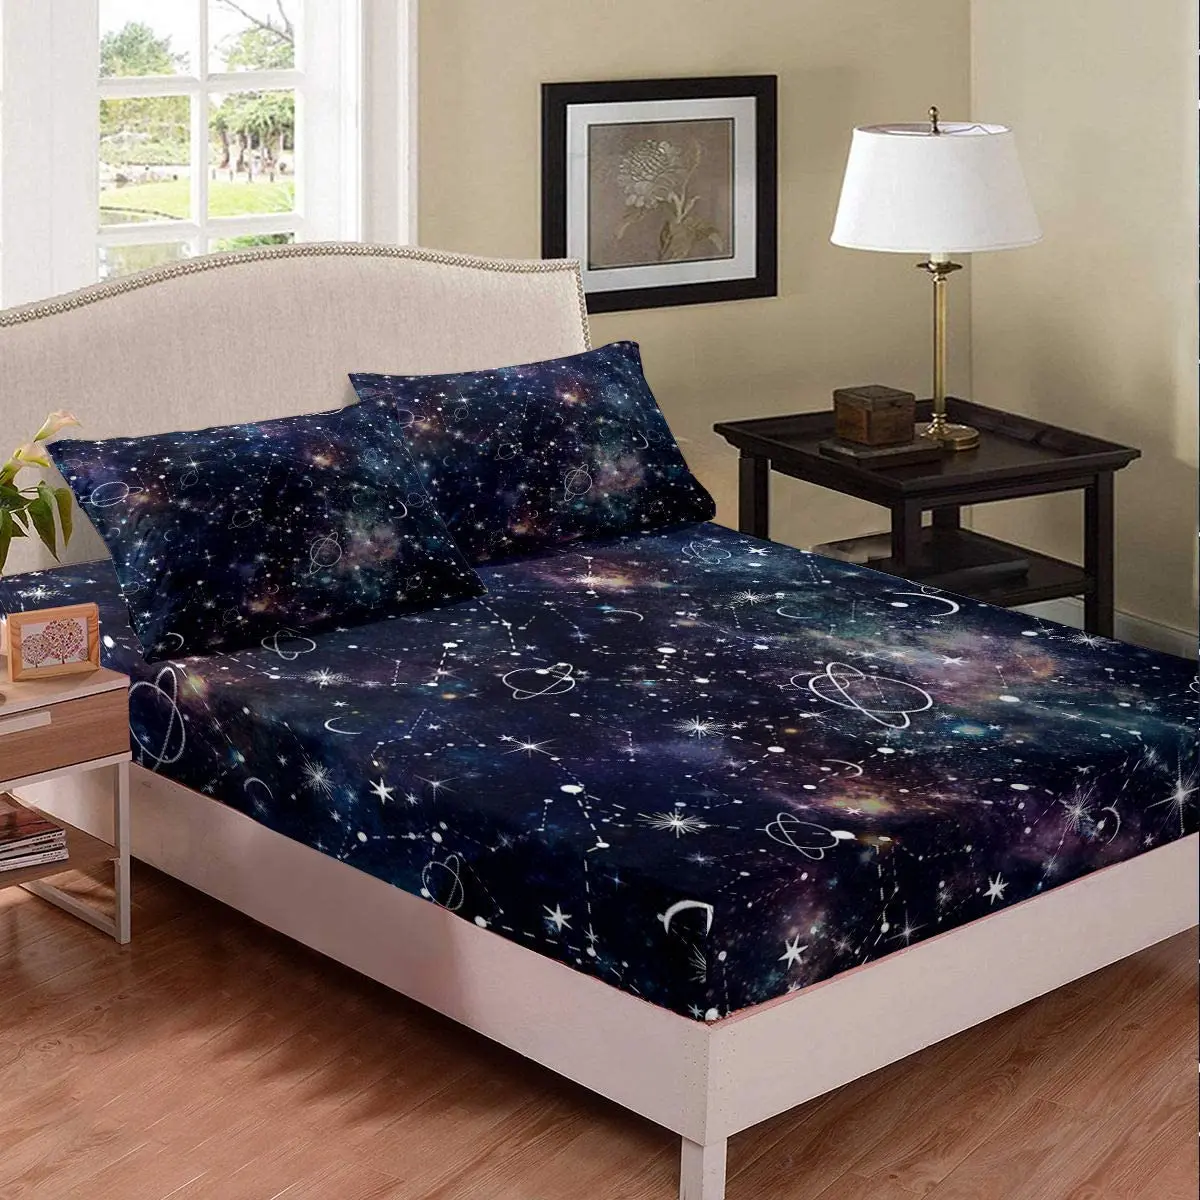 

Starry Sky Bedding Set Constellation Sheet Set Galaxy Sun Moon Fitted Sheet Purple Universe Print Bed Cover for Kid Men Women